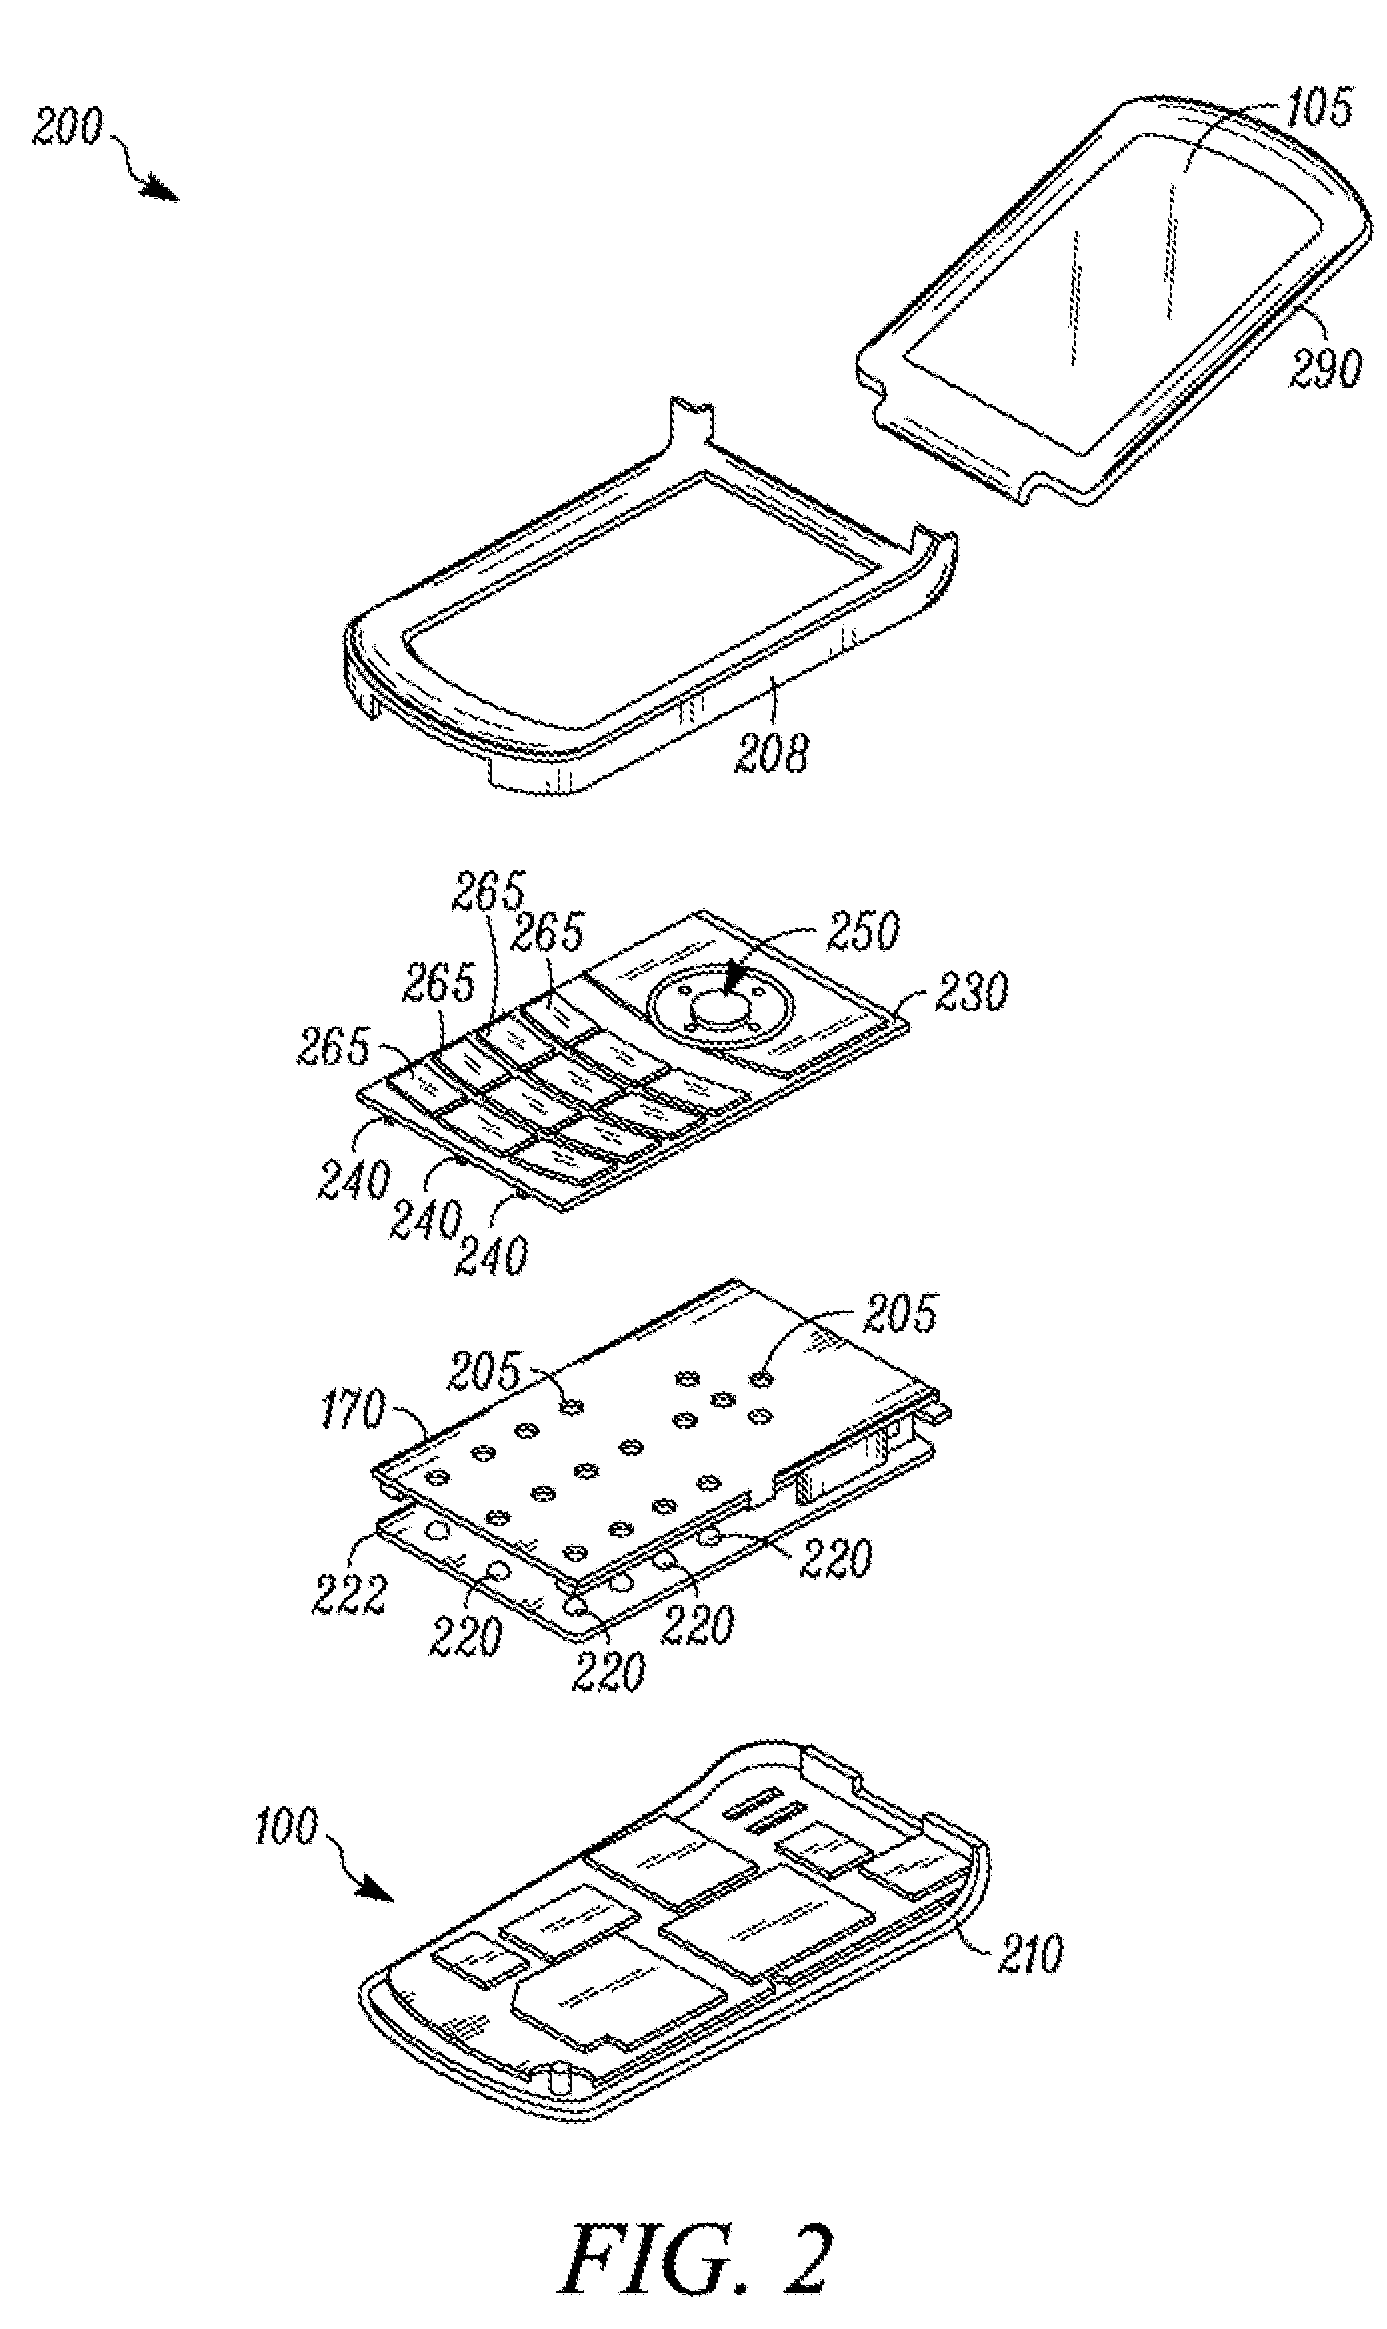 Electronic device and method for previewing media content